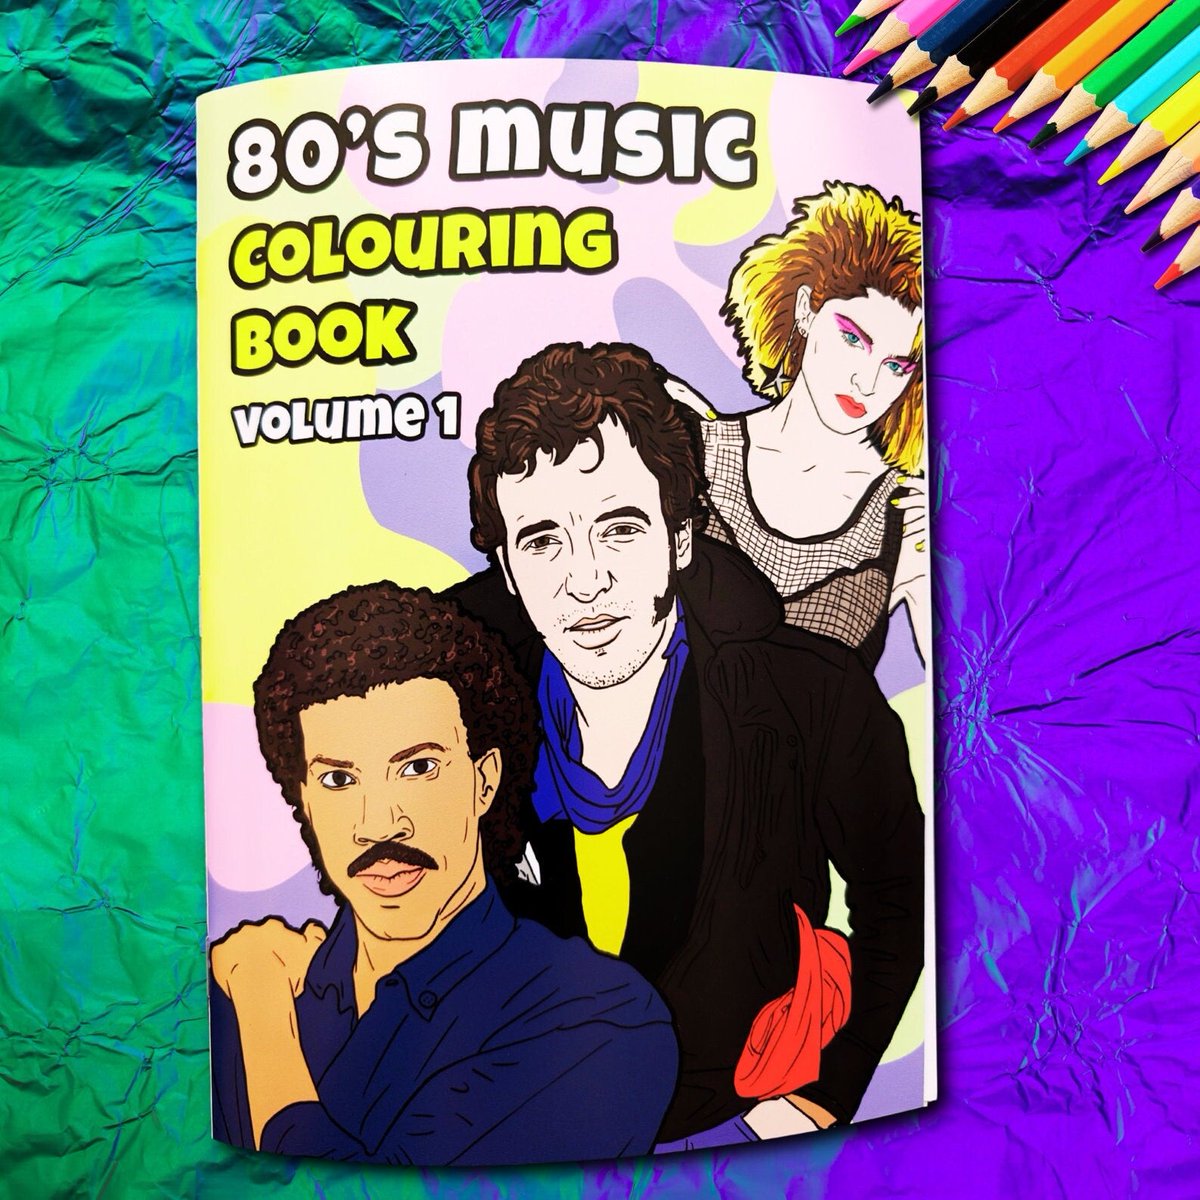 80s Music Colouring Book, adult colouring book, gift for 80s music fan, activity book, birthday gift, retro  colouring book, totally awesome tuppu.net/e26115dc #wallArt #greetingcards #newWave #giftideas #popCulture #ActivityBook